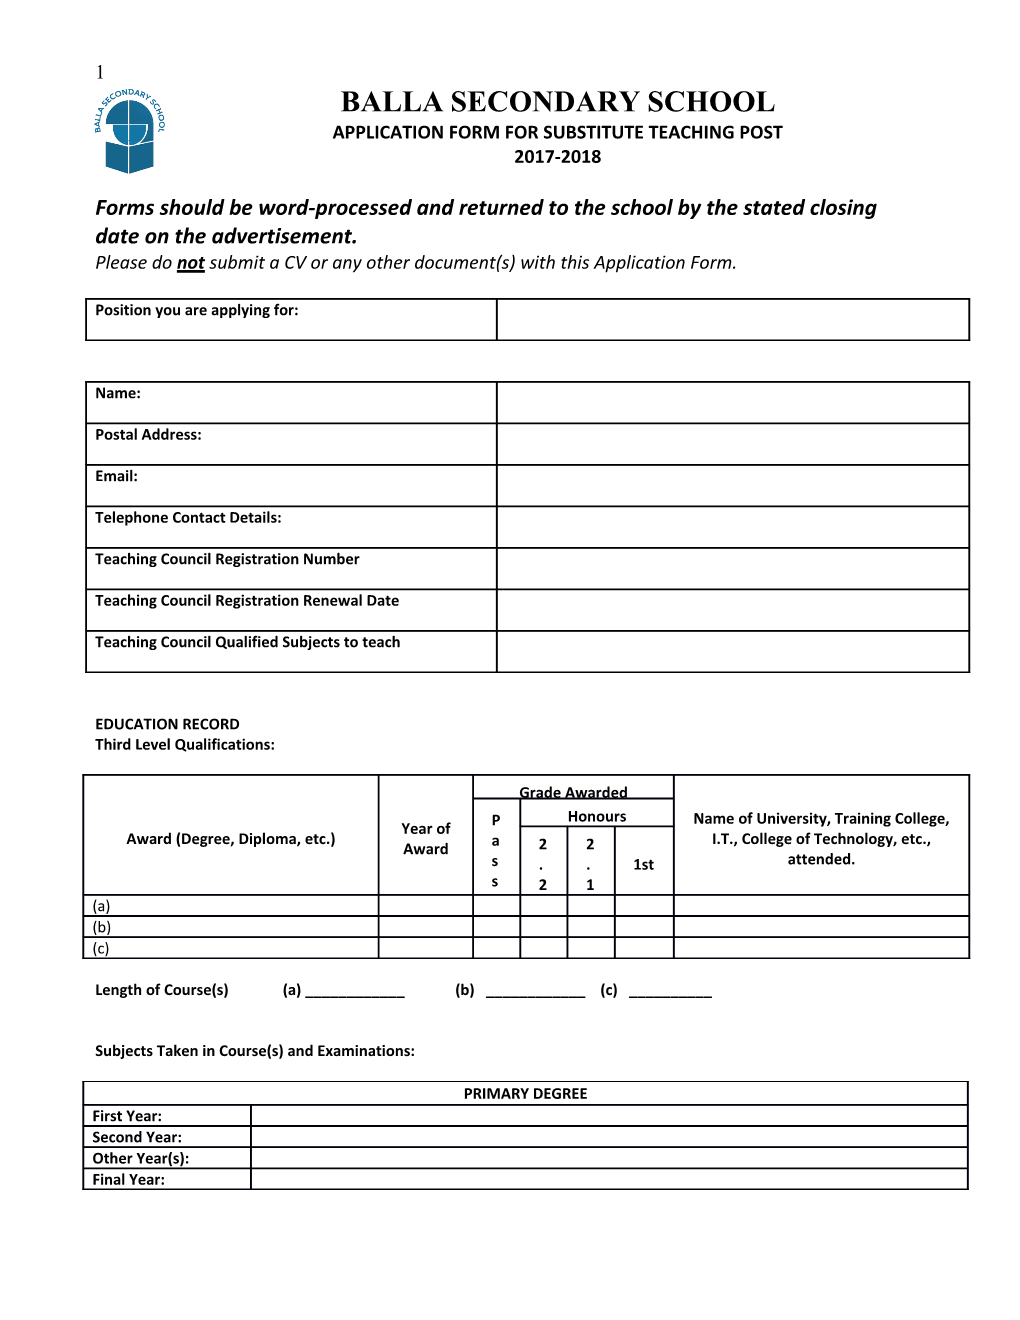 Application Form for Substitute Teaching Post